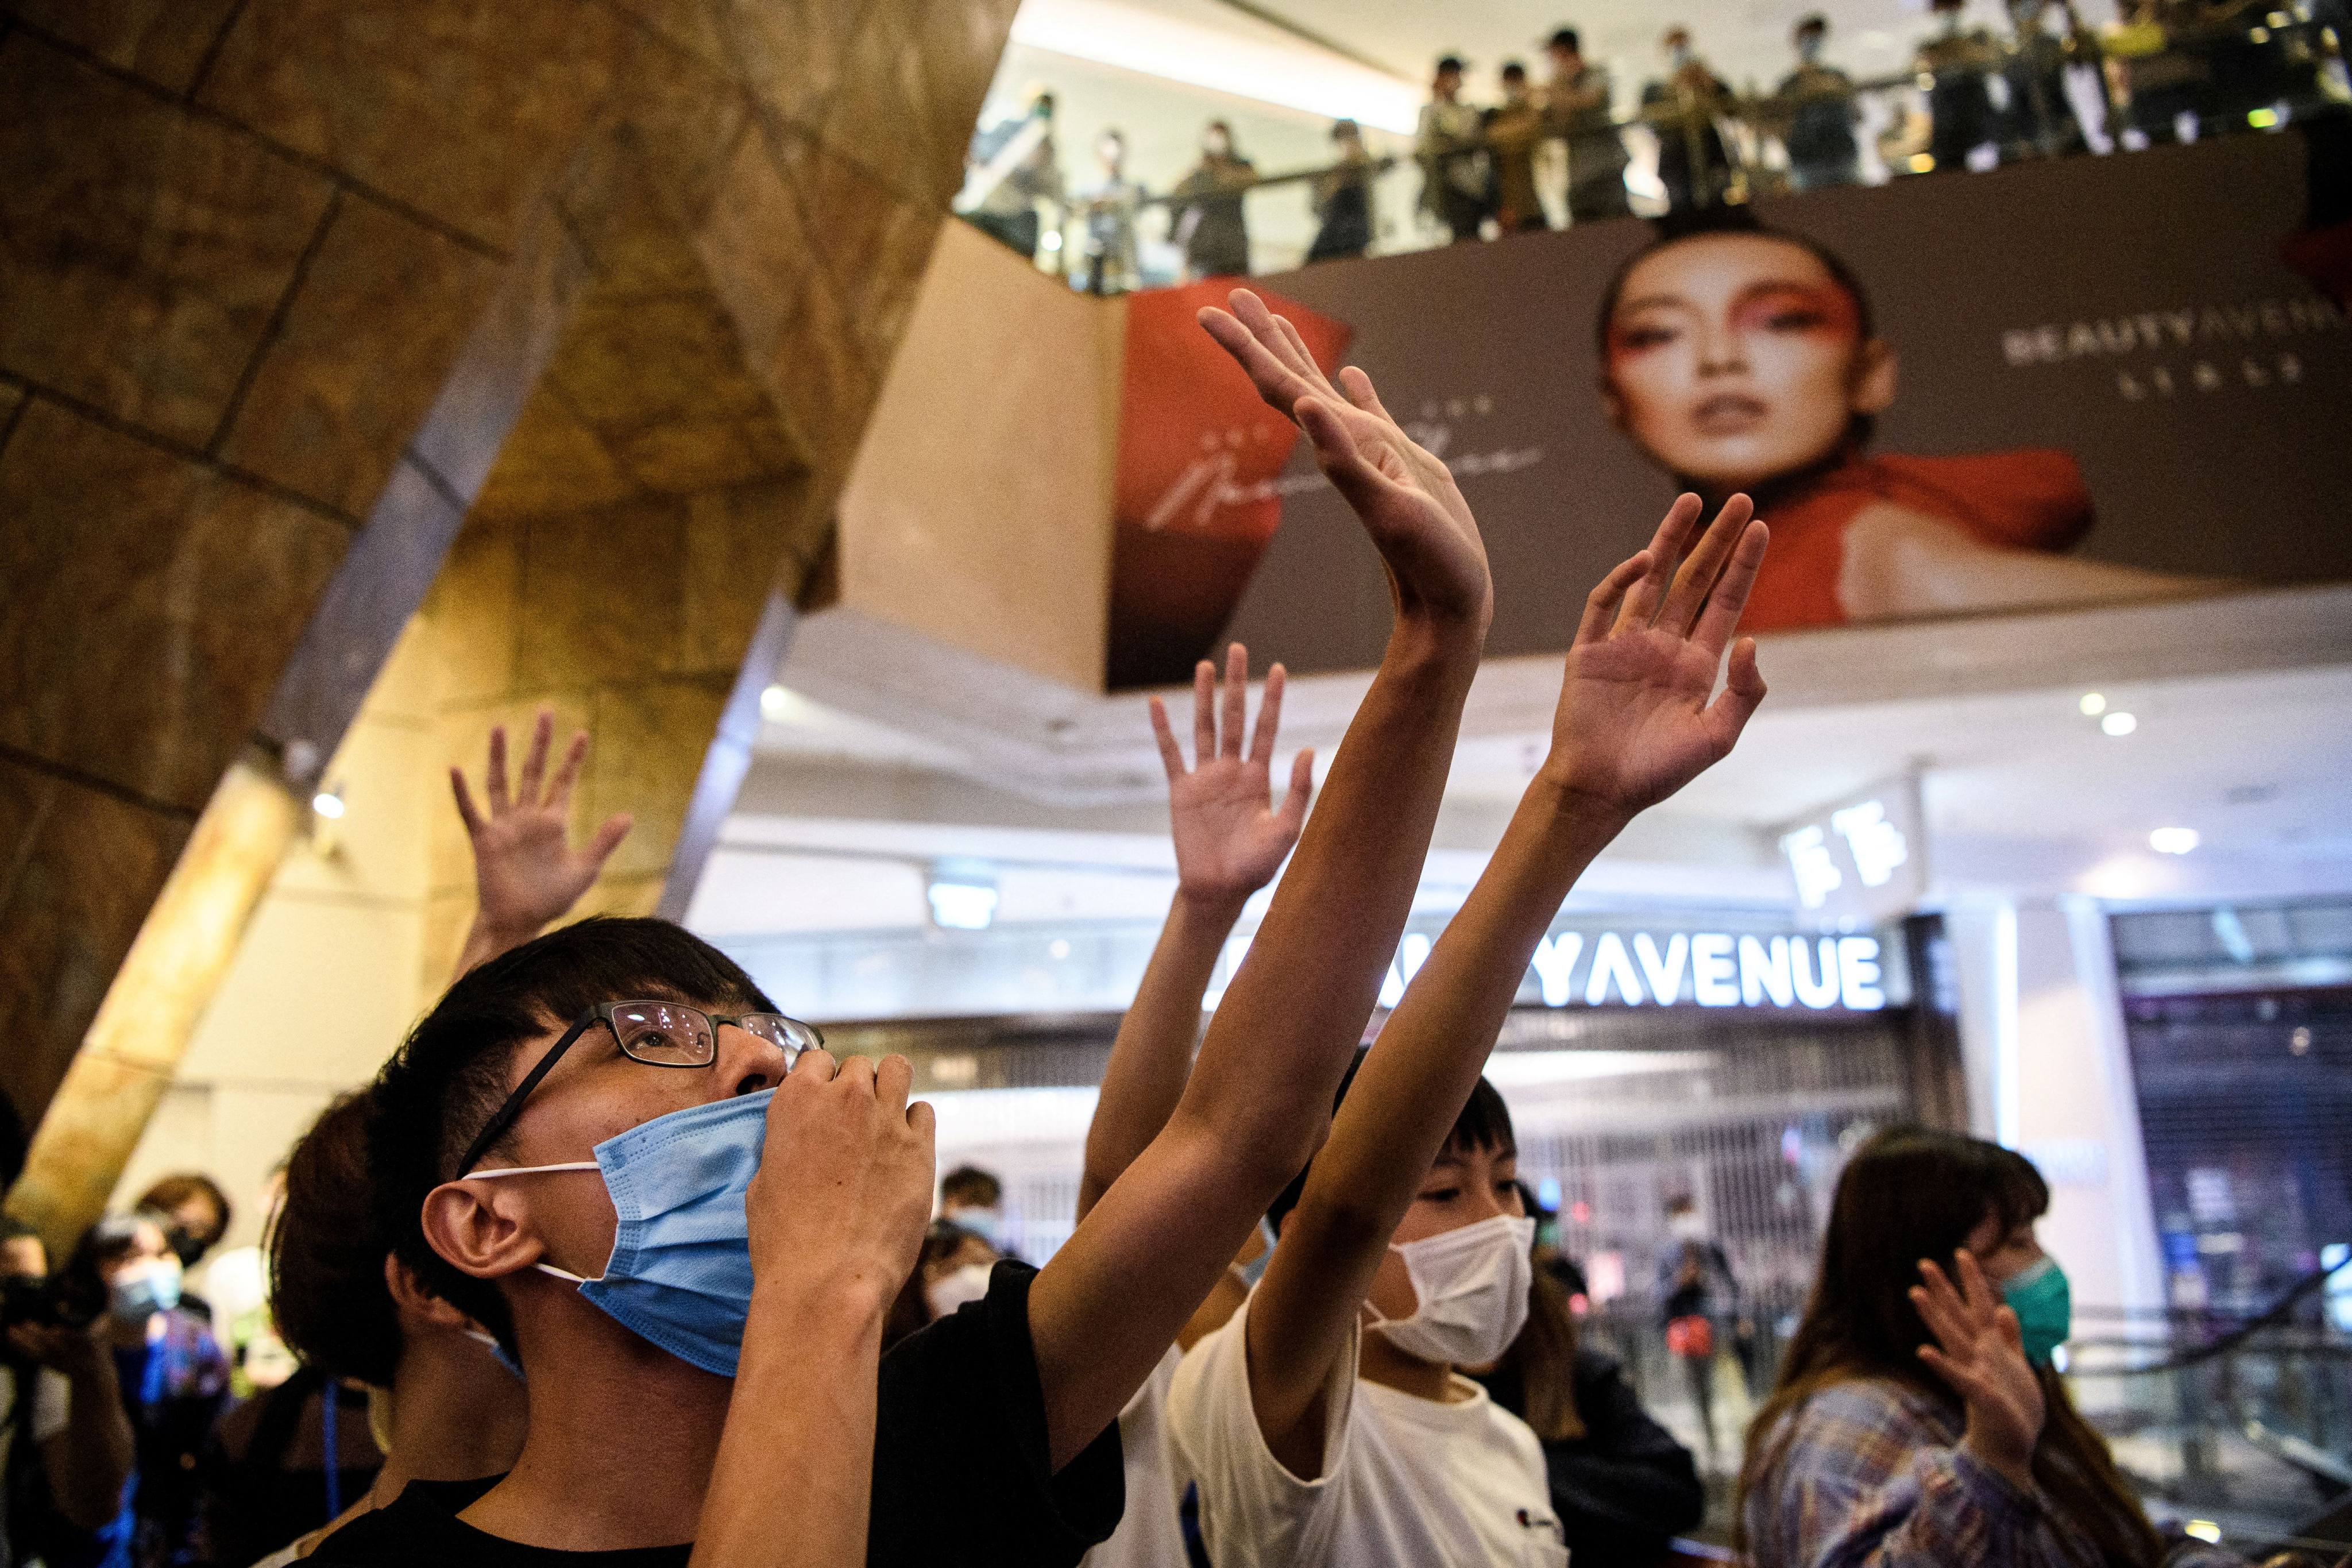 Anti-government protesters sing “Glory to Hong Kong” at a shopping mall in the city on May 13, 2020. File photo: AFP